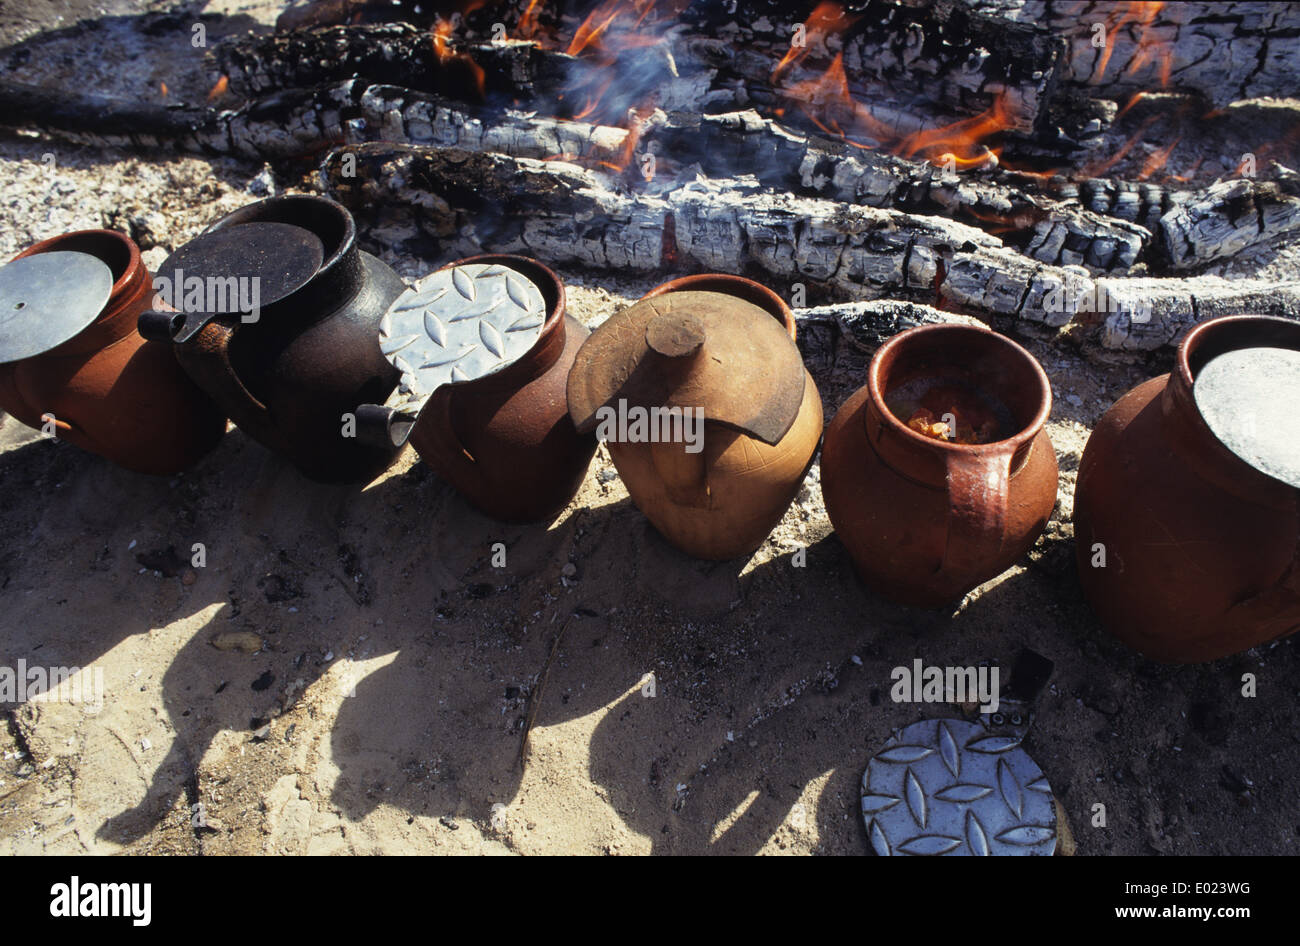 Cooking In Clay Pans On A Wood Stove In An Old House In The Mountains  High-Res Stock Photo - Getty Images